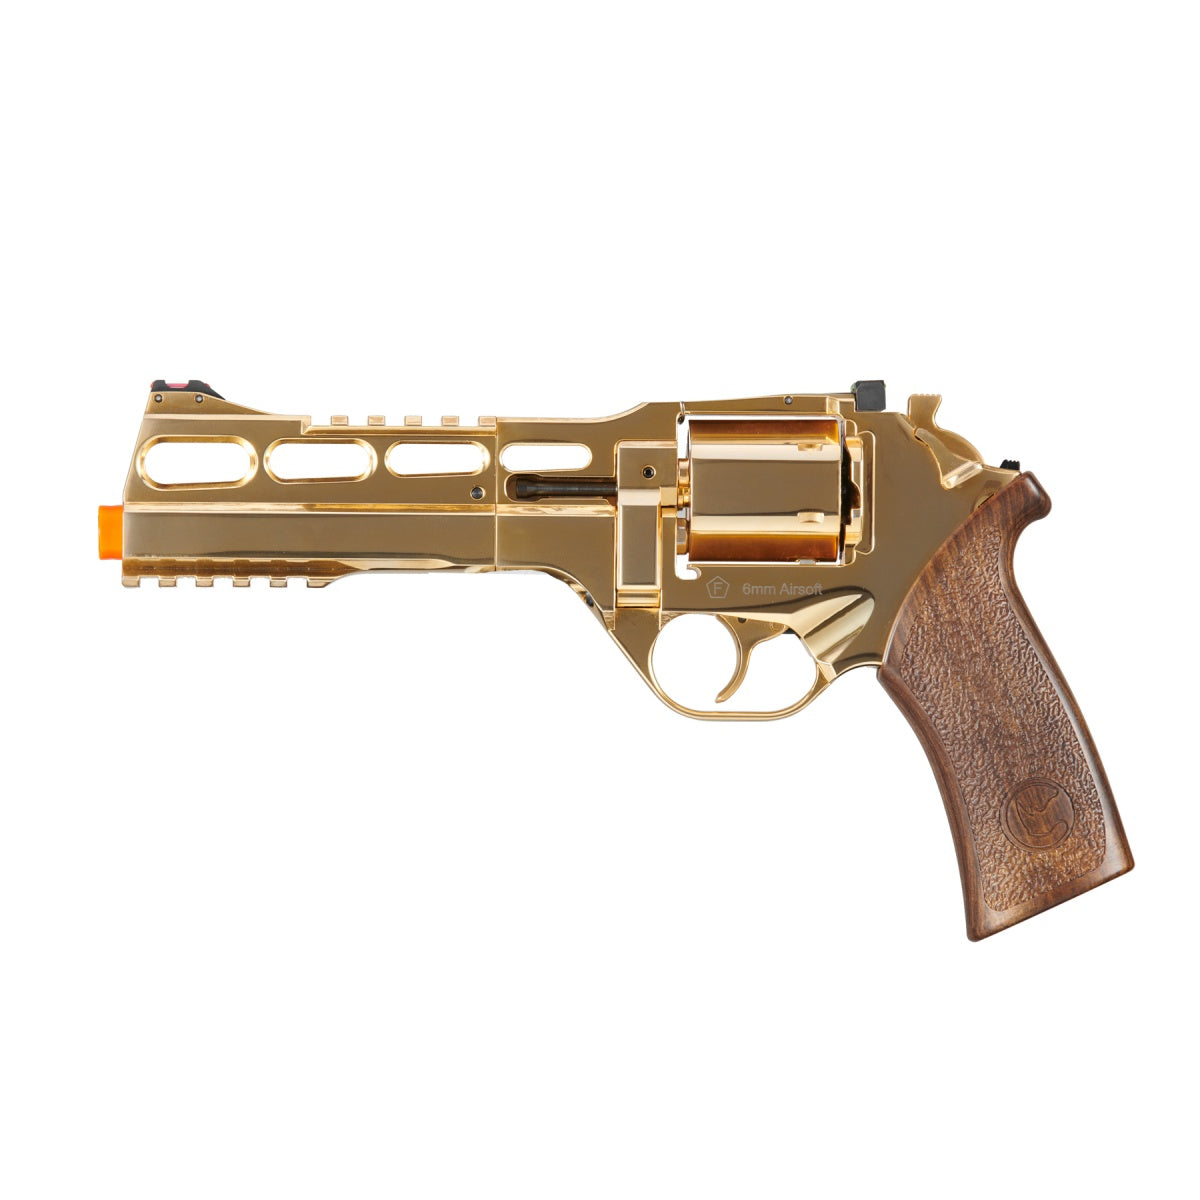 PACK REVOLVER CO2 CHIAPPA RHINO 50DS ARGENT FULL METAL 0.95 JOULE + BILLE +  CIBLE + MALLETTE + 5 CO2 PCKPG1051 AIRSOFT